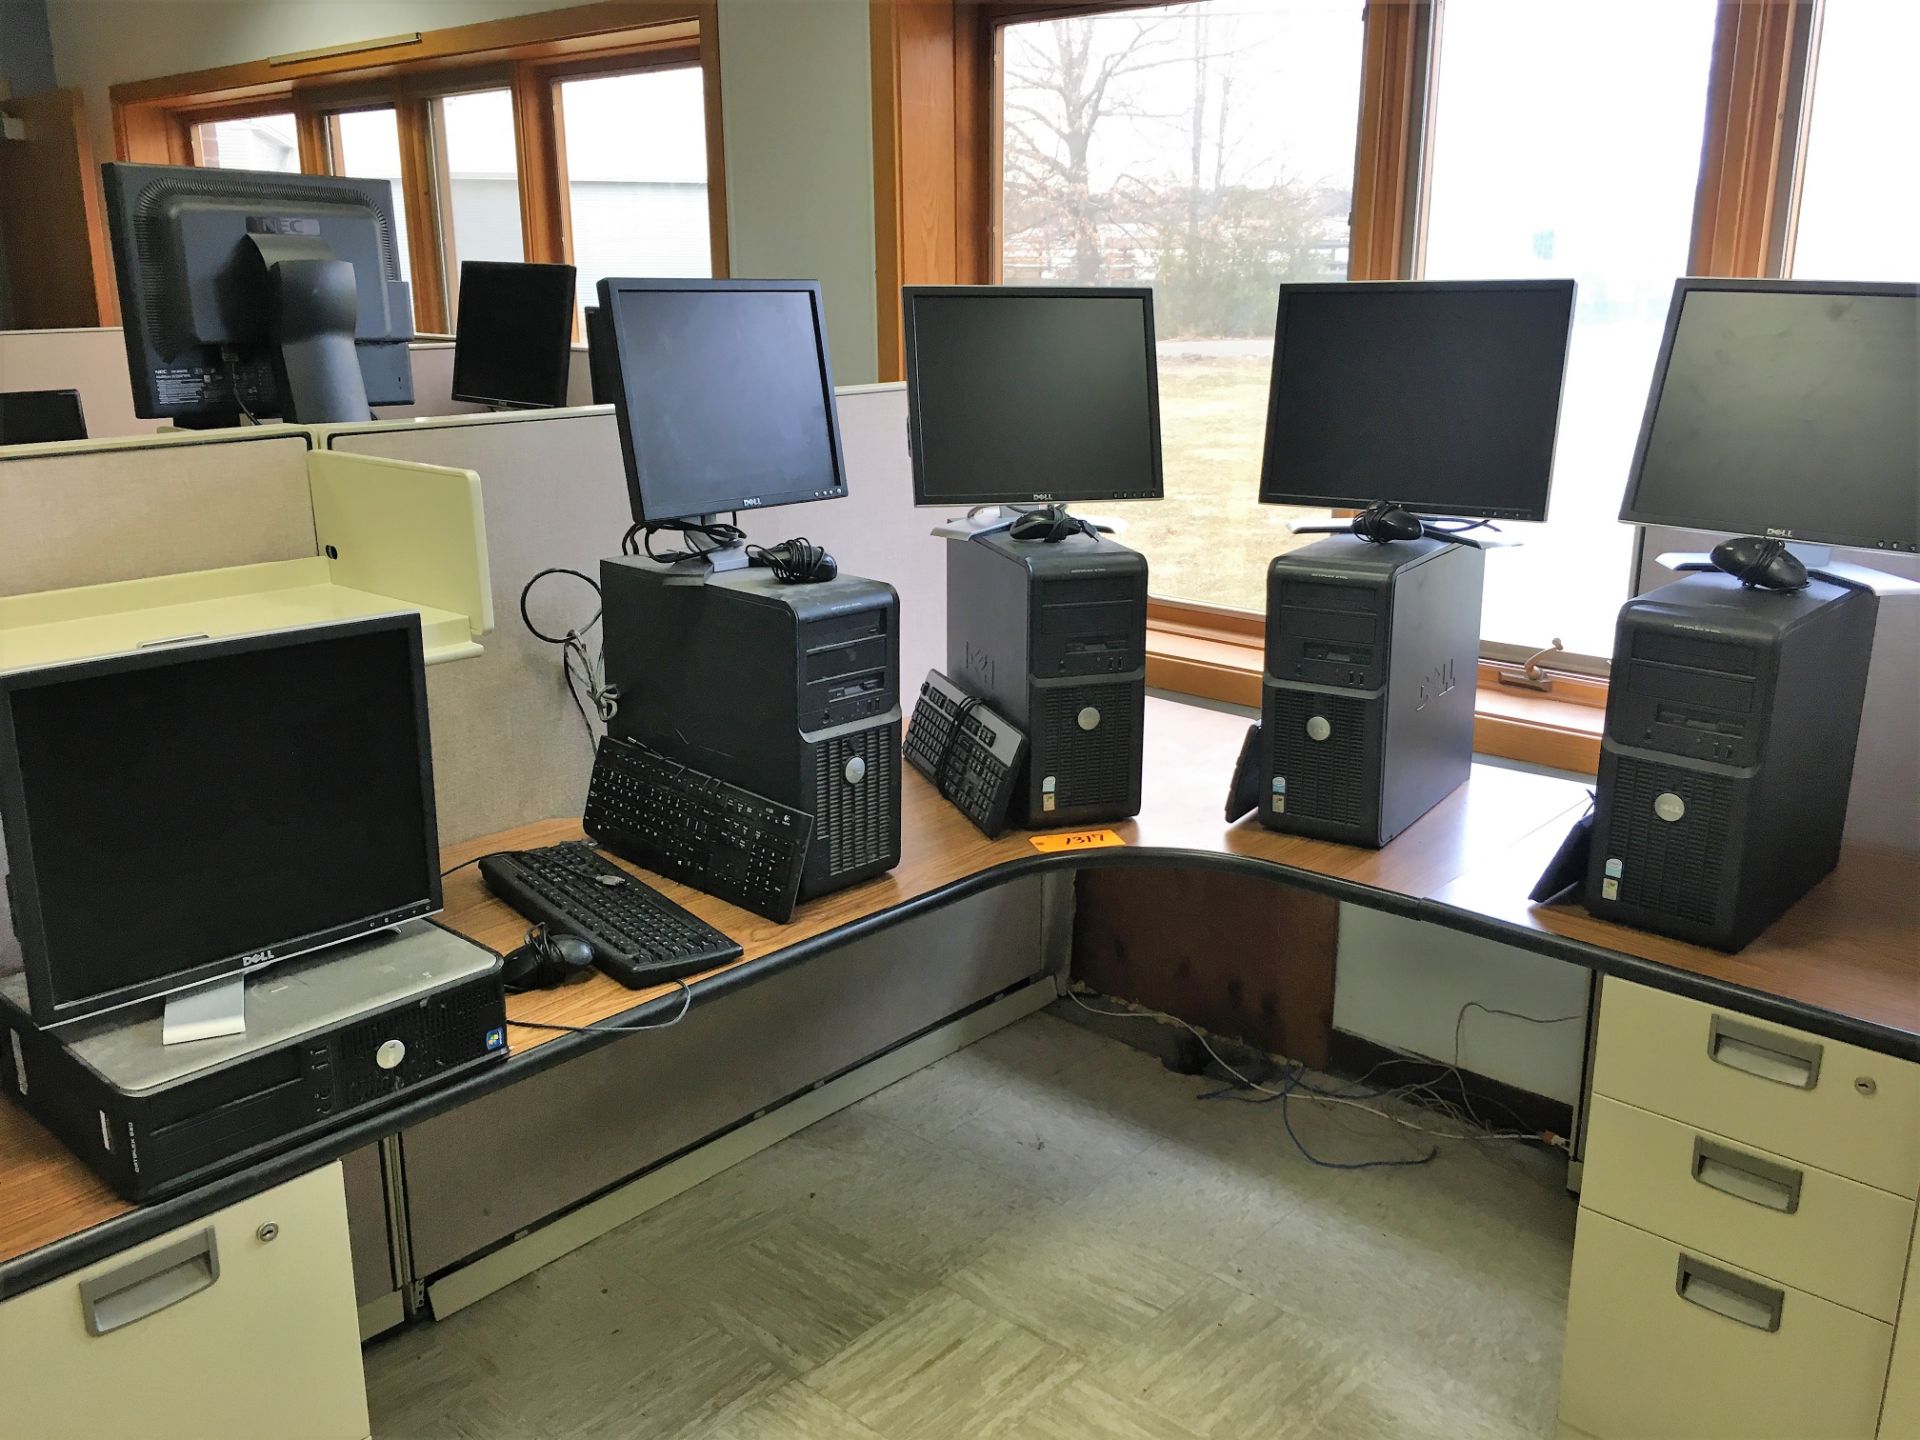 (5) COMPUTERS WITH MONITORS